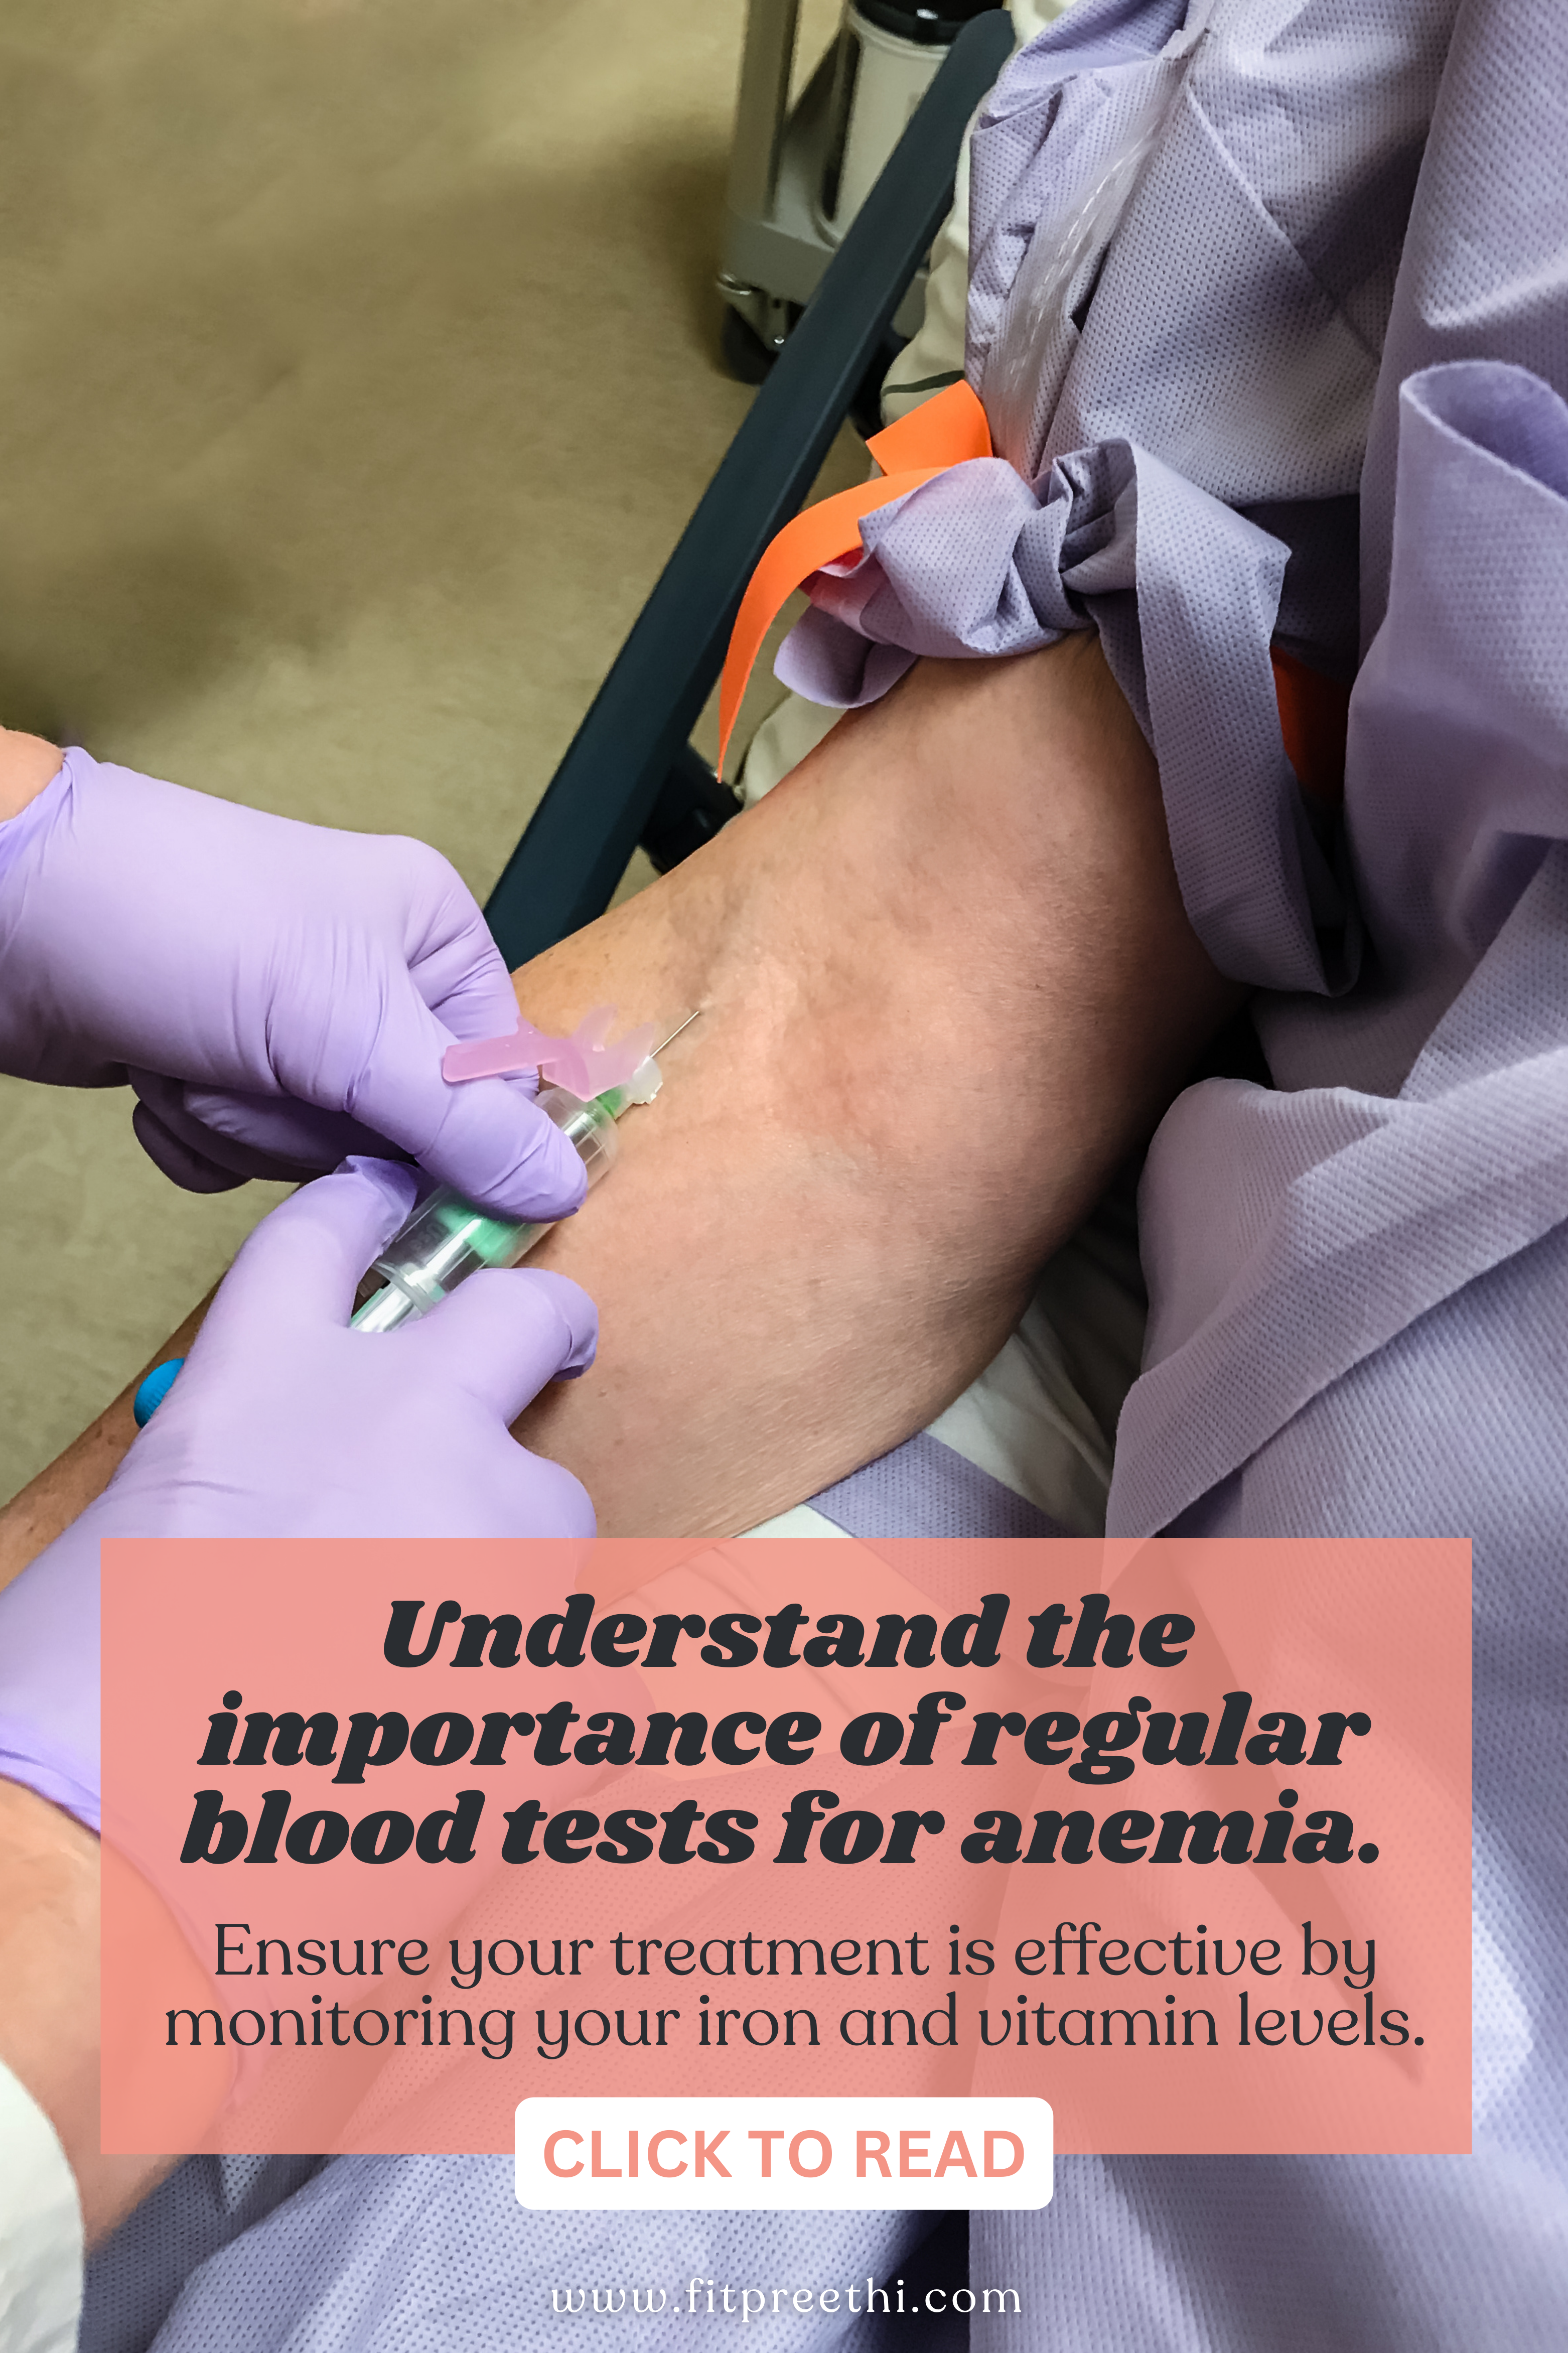 a person injecting blood into a vein